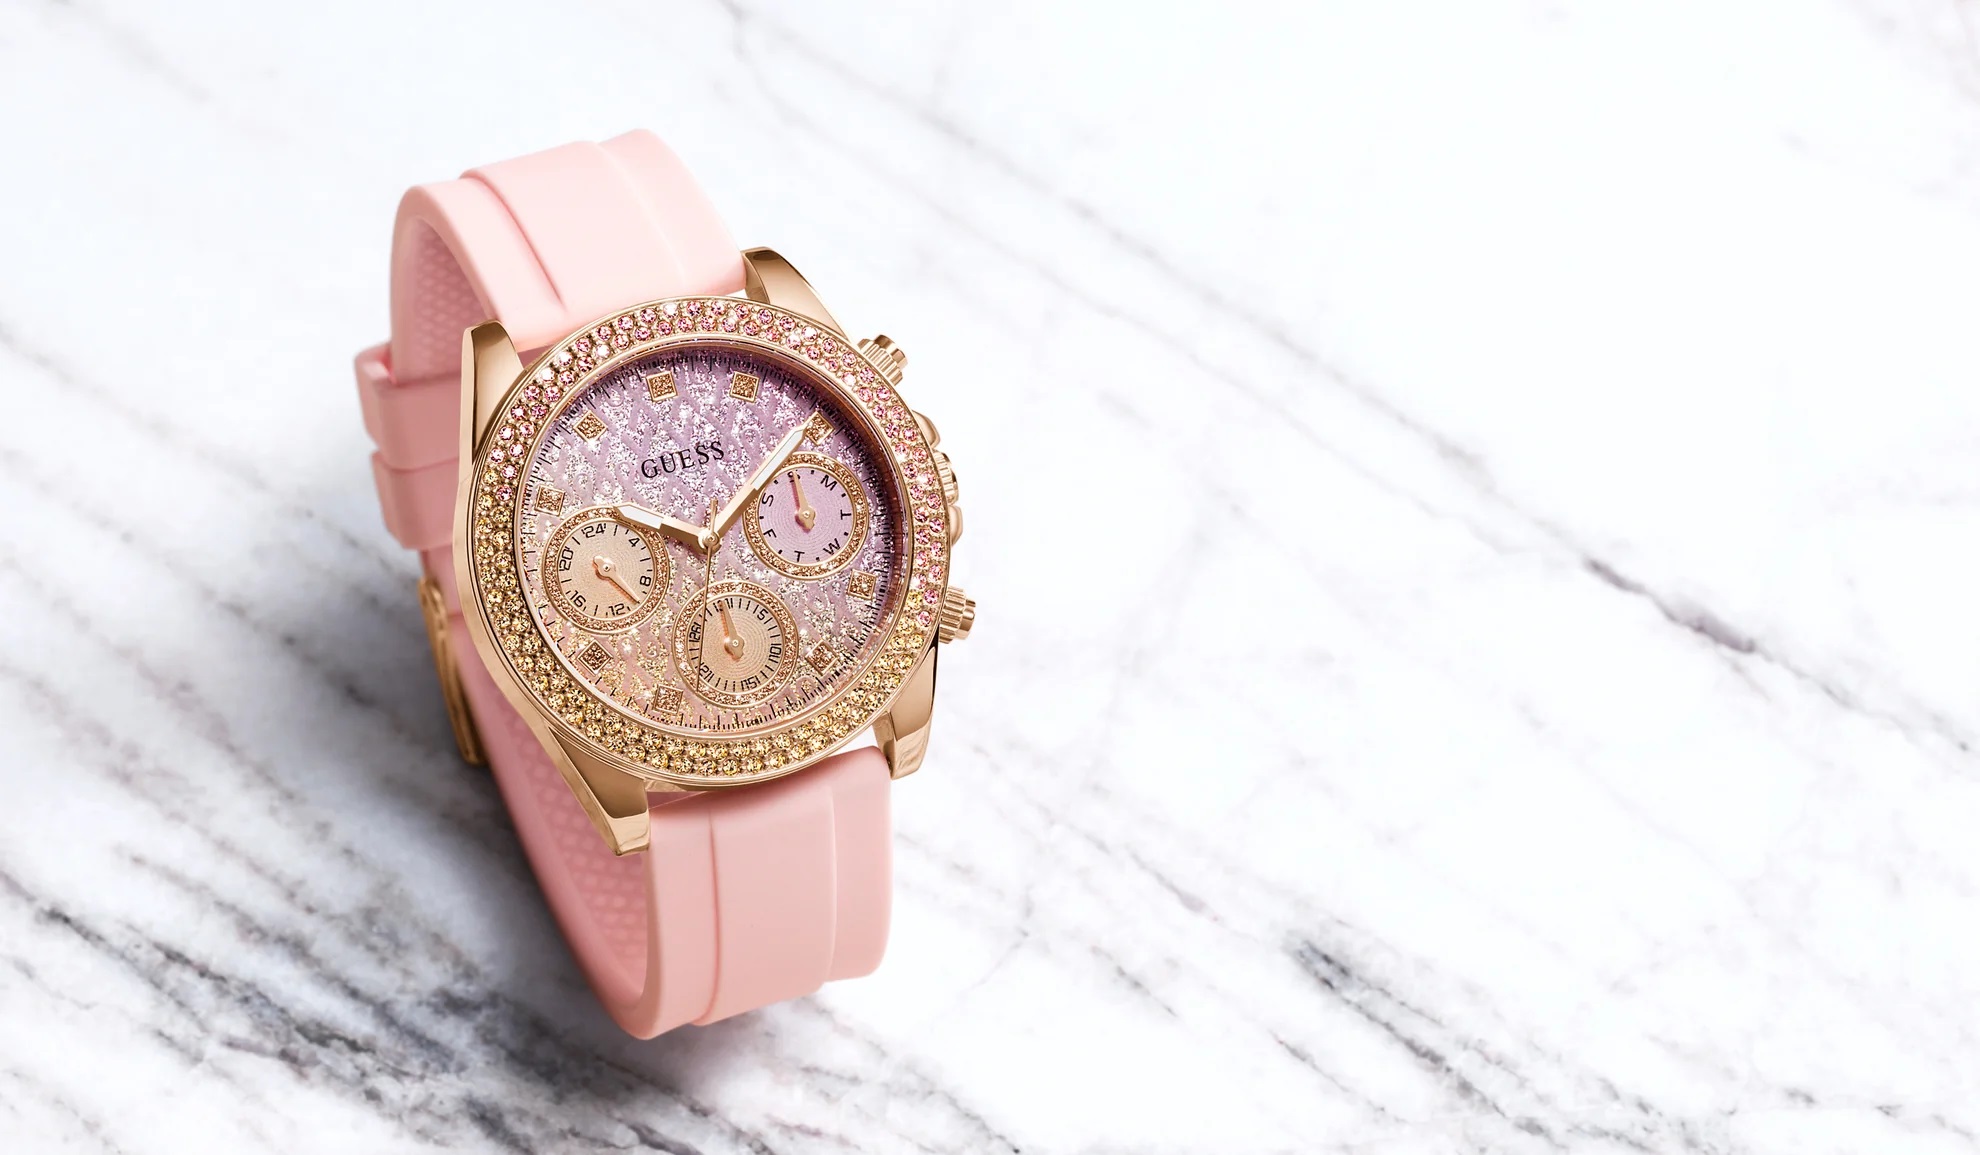 ĐỒNG HỒ NỮ GUESS LADIES SPARKLING PINK LIMITED EDITION WATCH GW0032L4 5